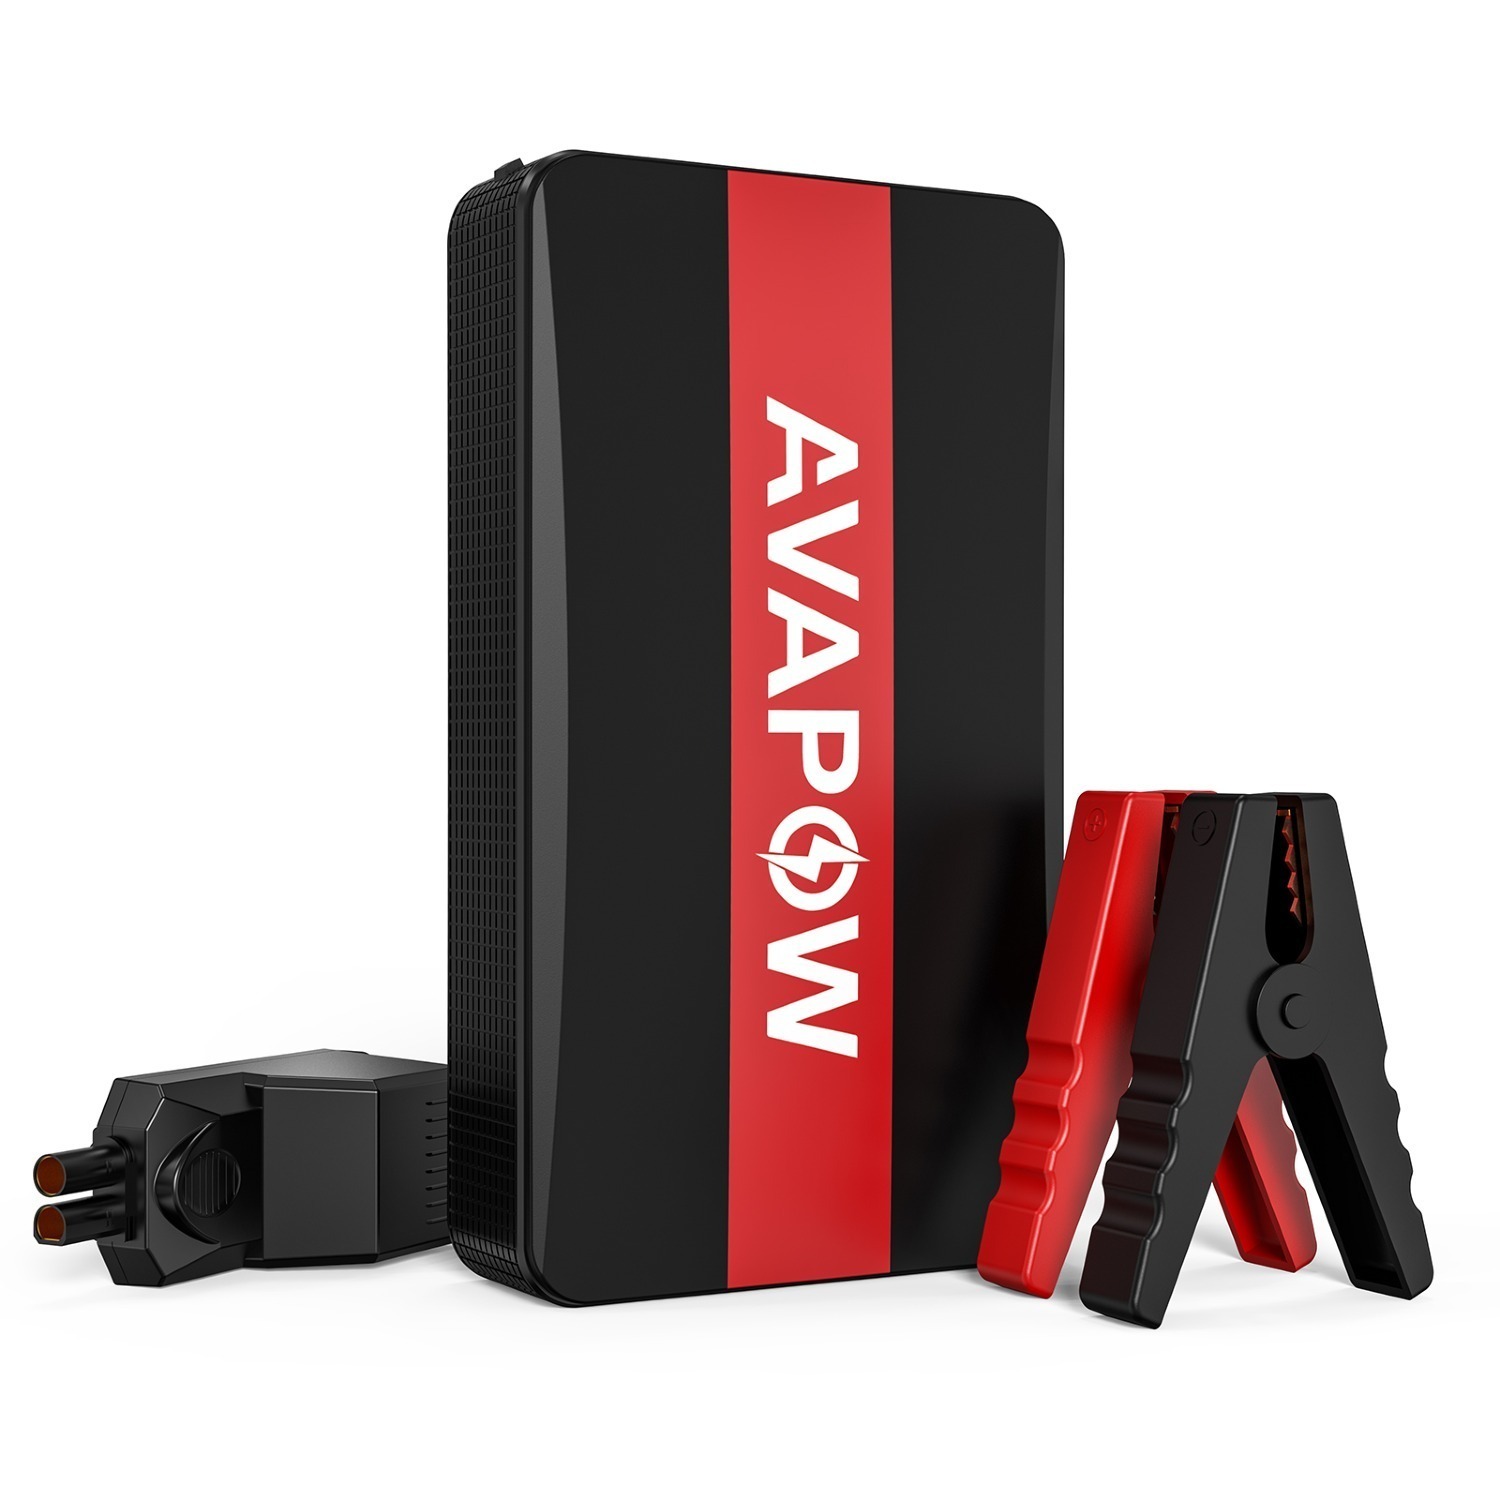 1000A AVAPOW 12V Portable Car Jump Starter (up to 7.0L Gas) w/ 9600mAh Power Bank & Built-in LED Light $20 + FS w/ Walmart+